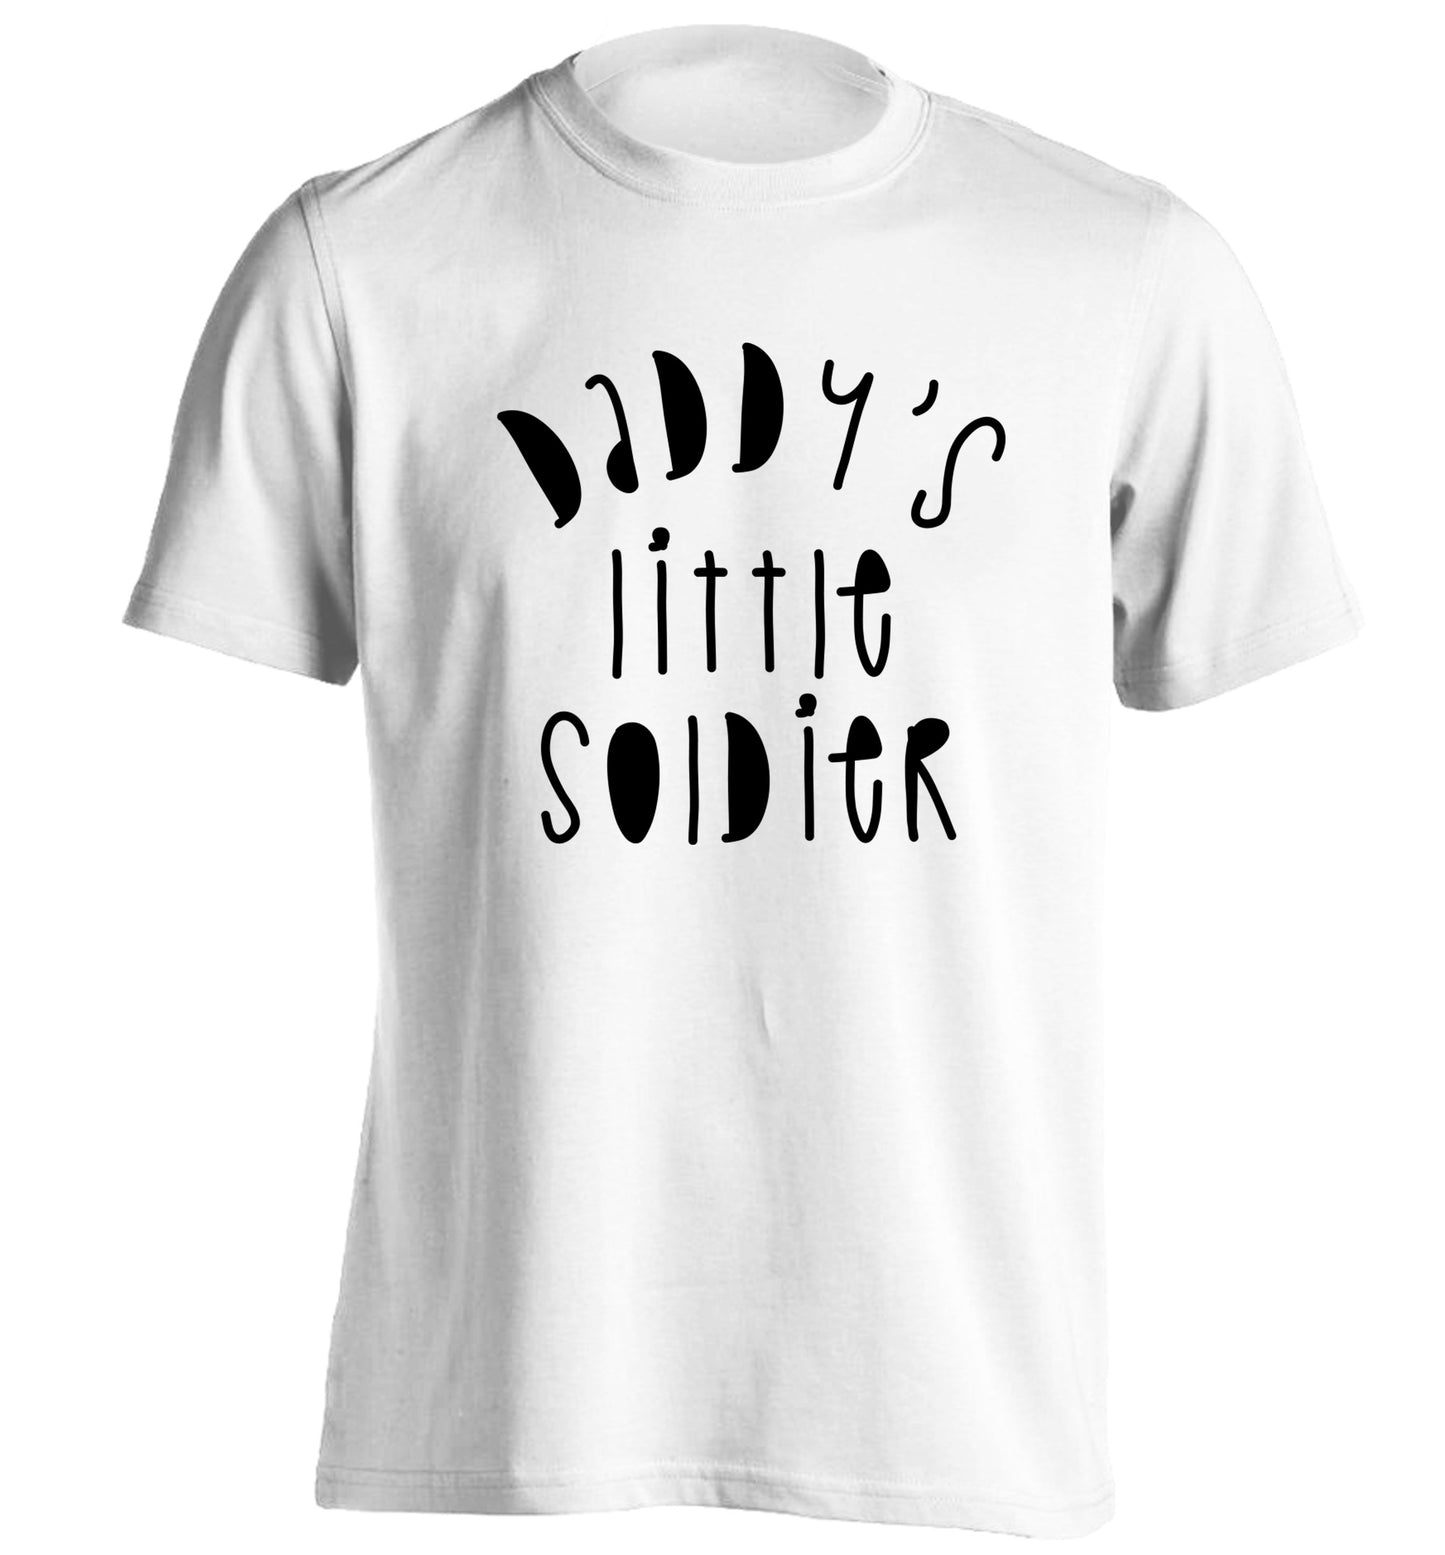 Daddy's little soldier adults unisex white Tshirt 2XL